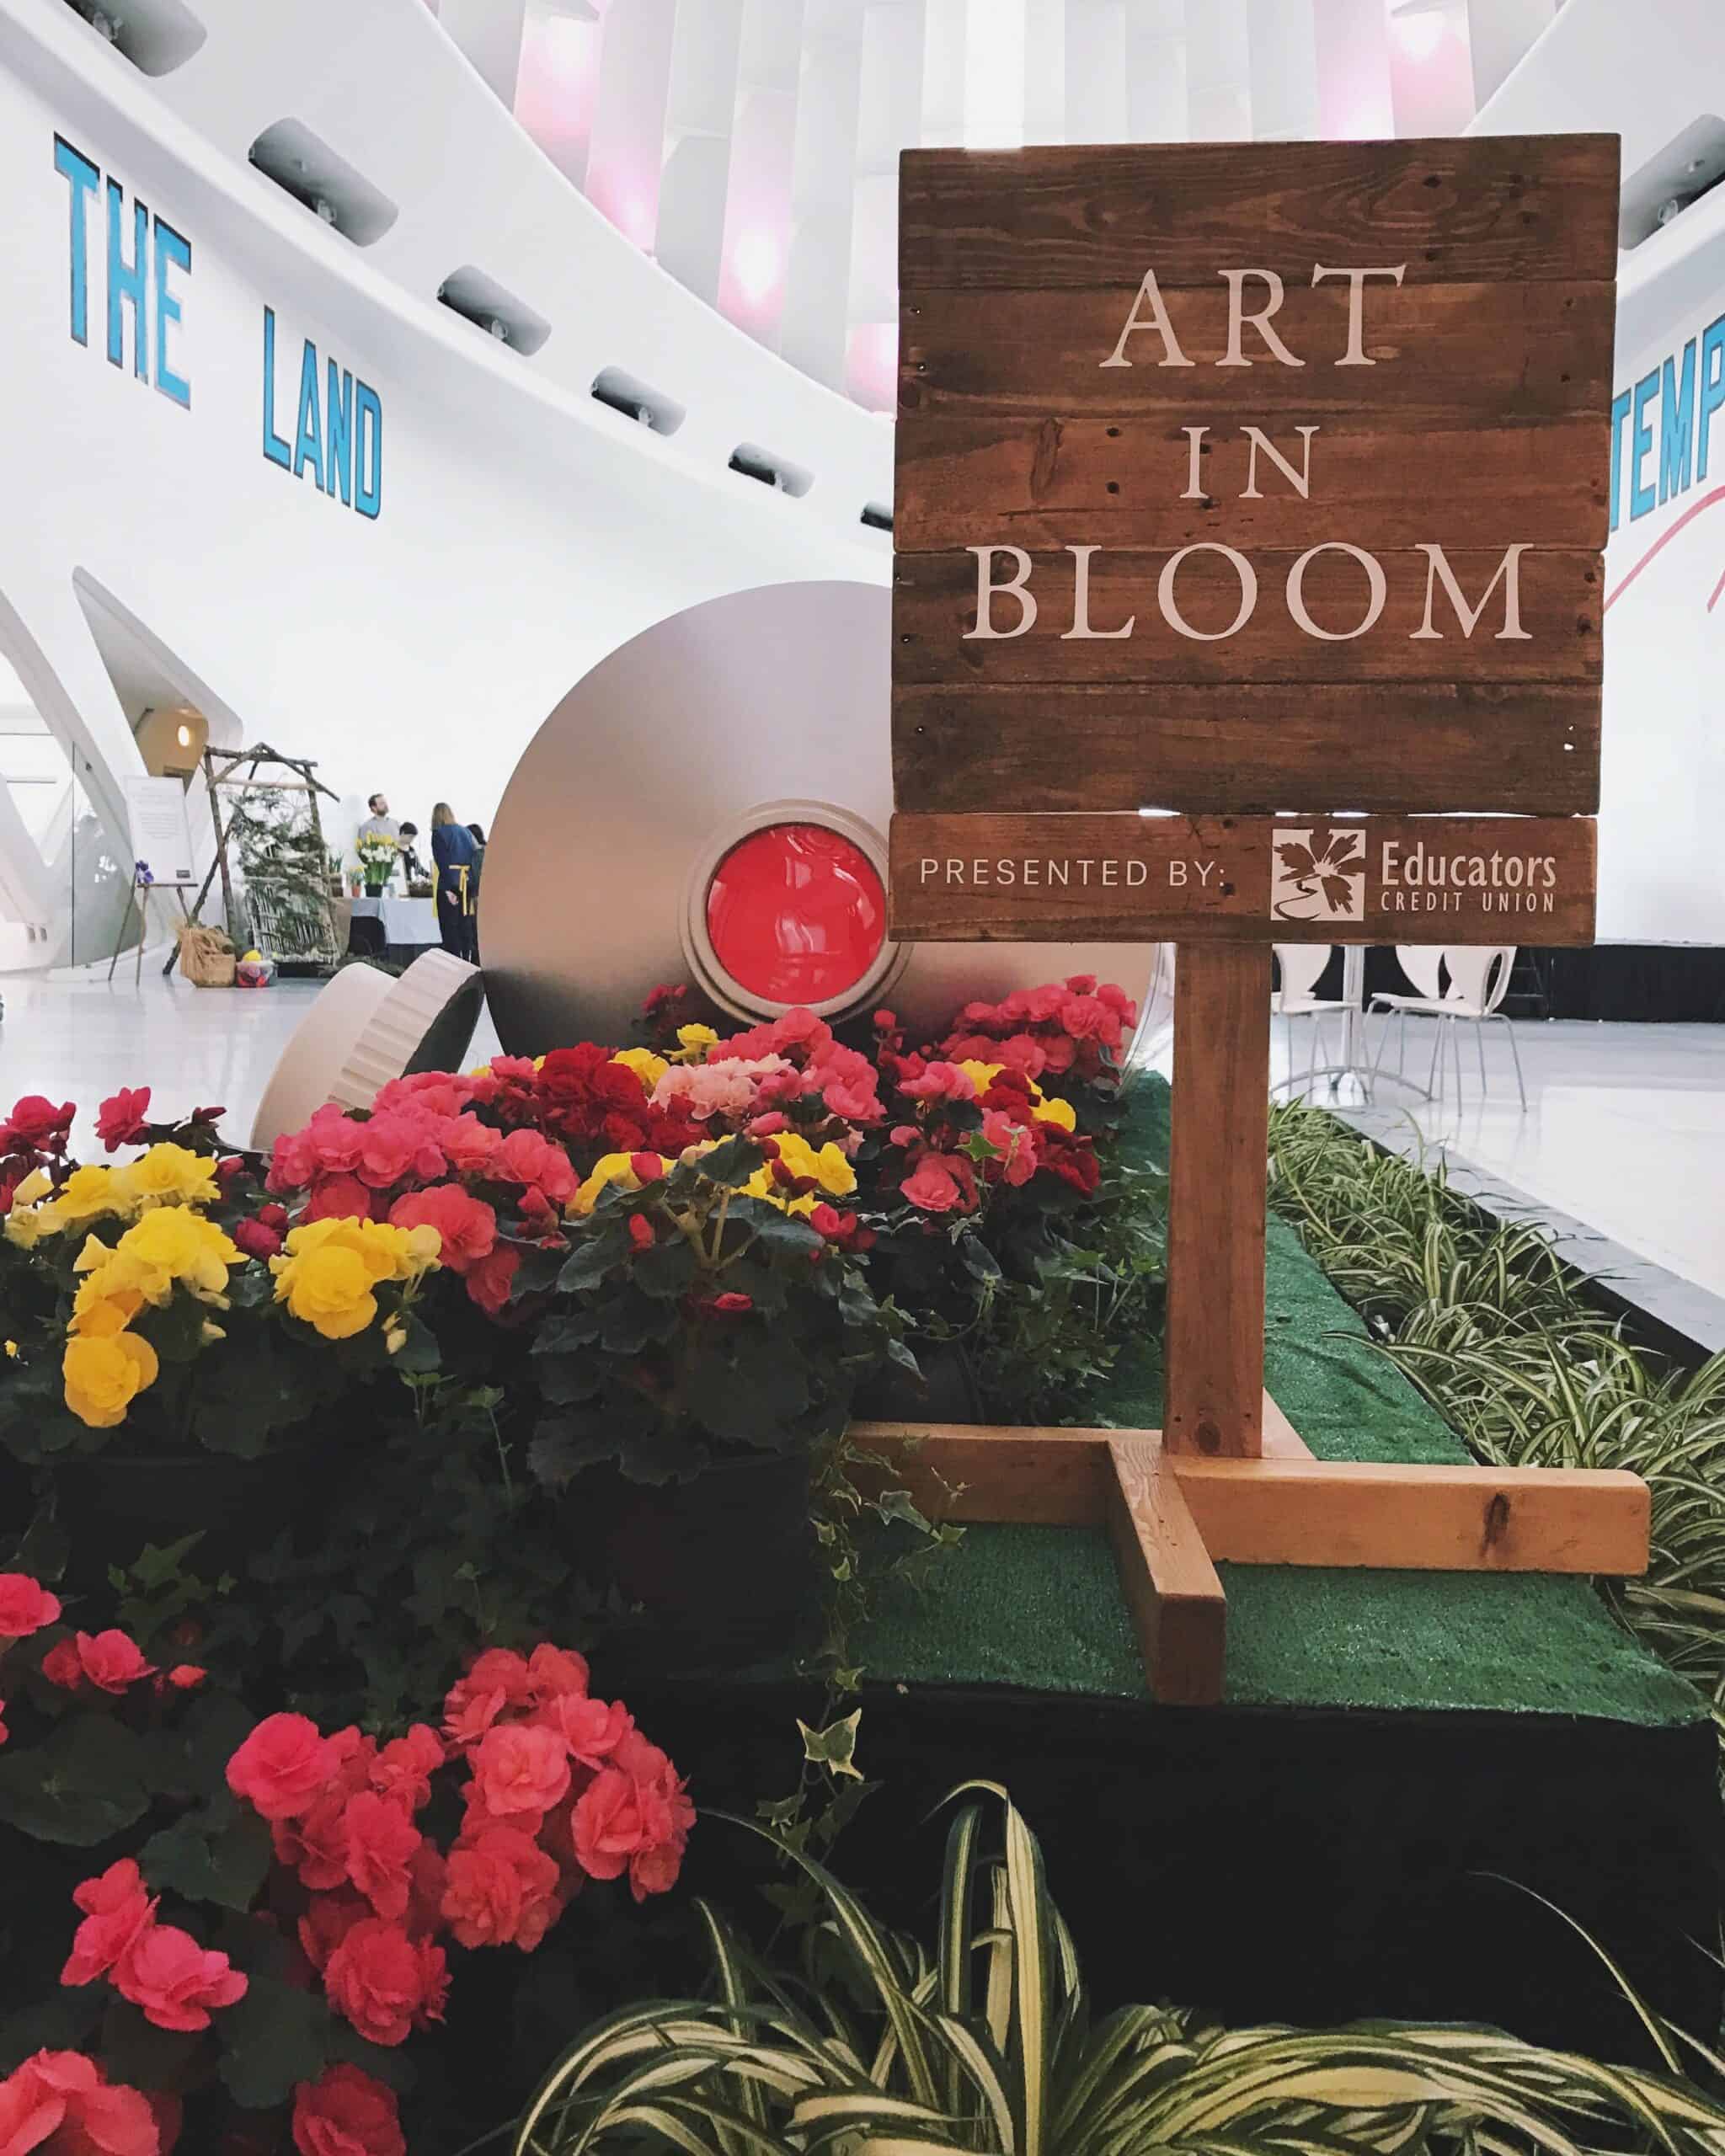 a sign with the words "art in bloom, presented by Educators Credit Union" amongst a display of flowers